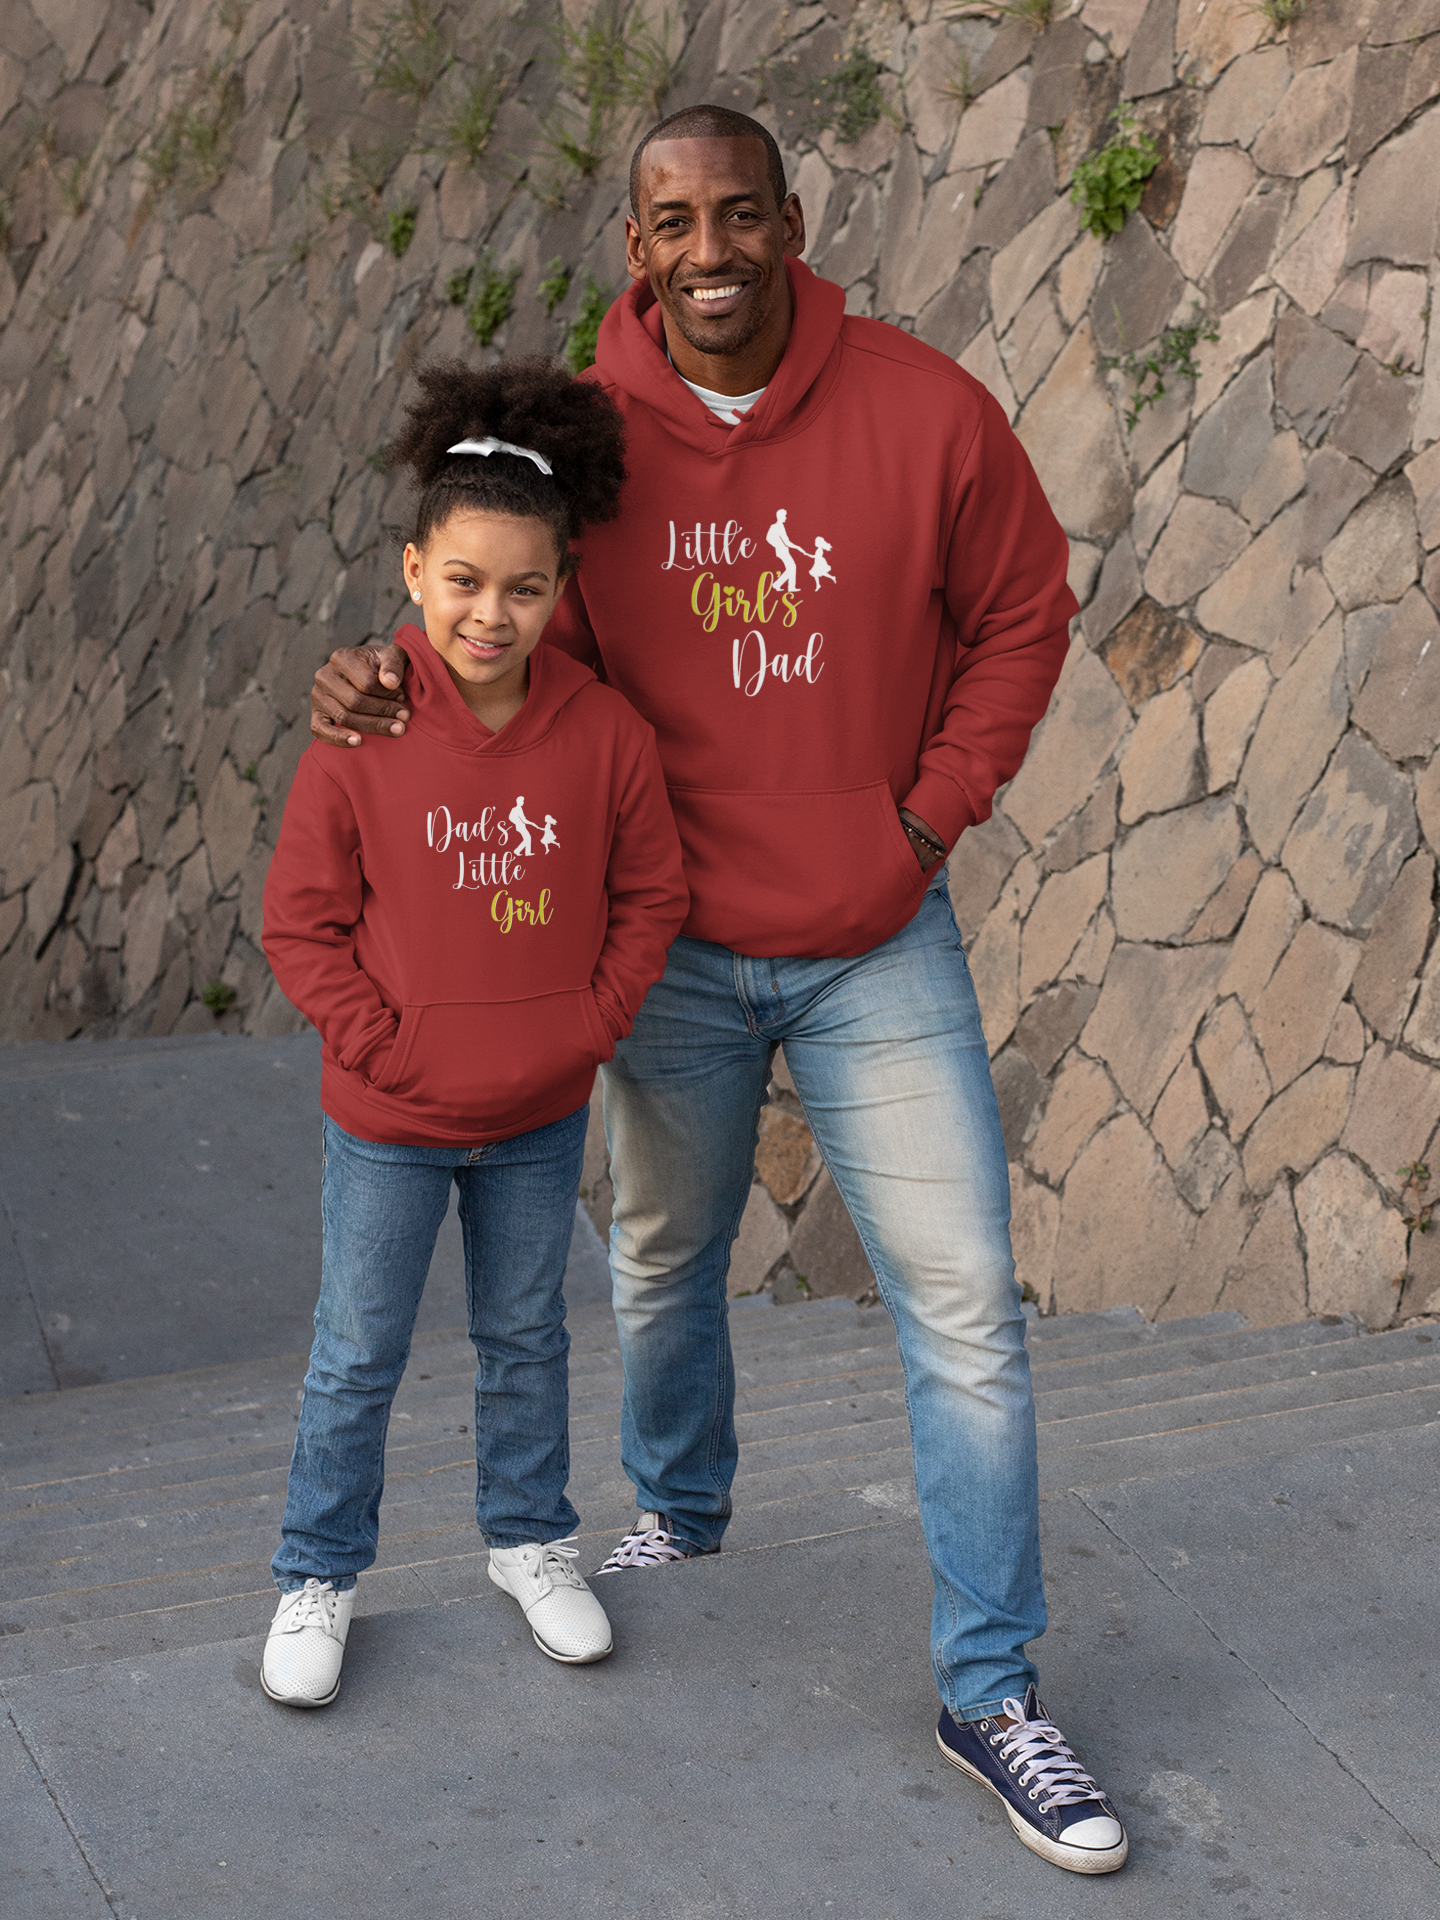 Little Girls Dad Father and Daughter Red Matching Hoodies- FunkyTradition